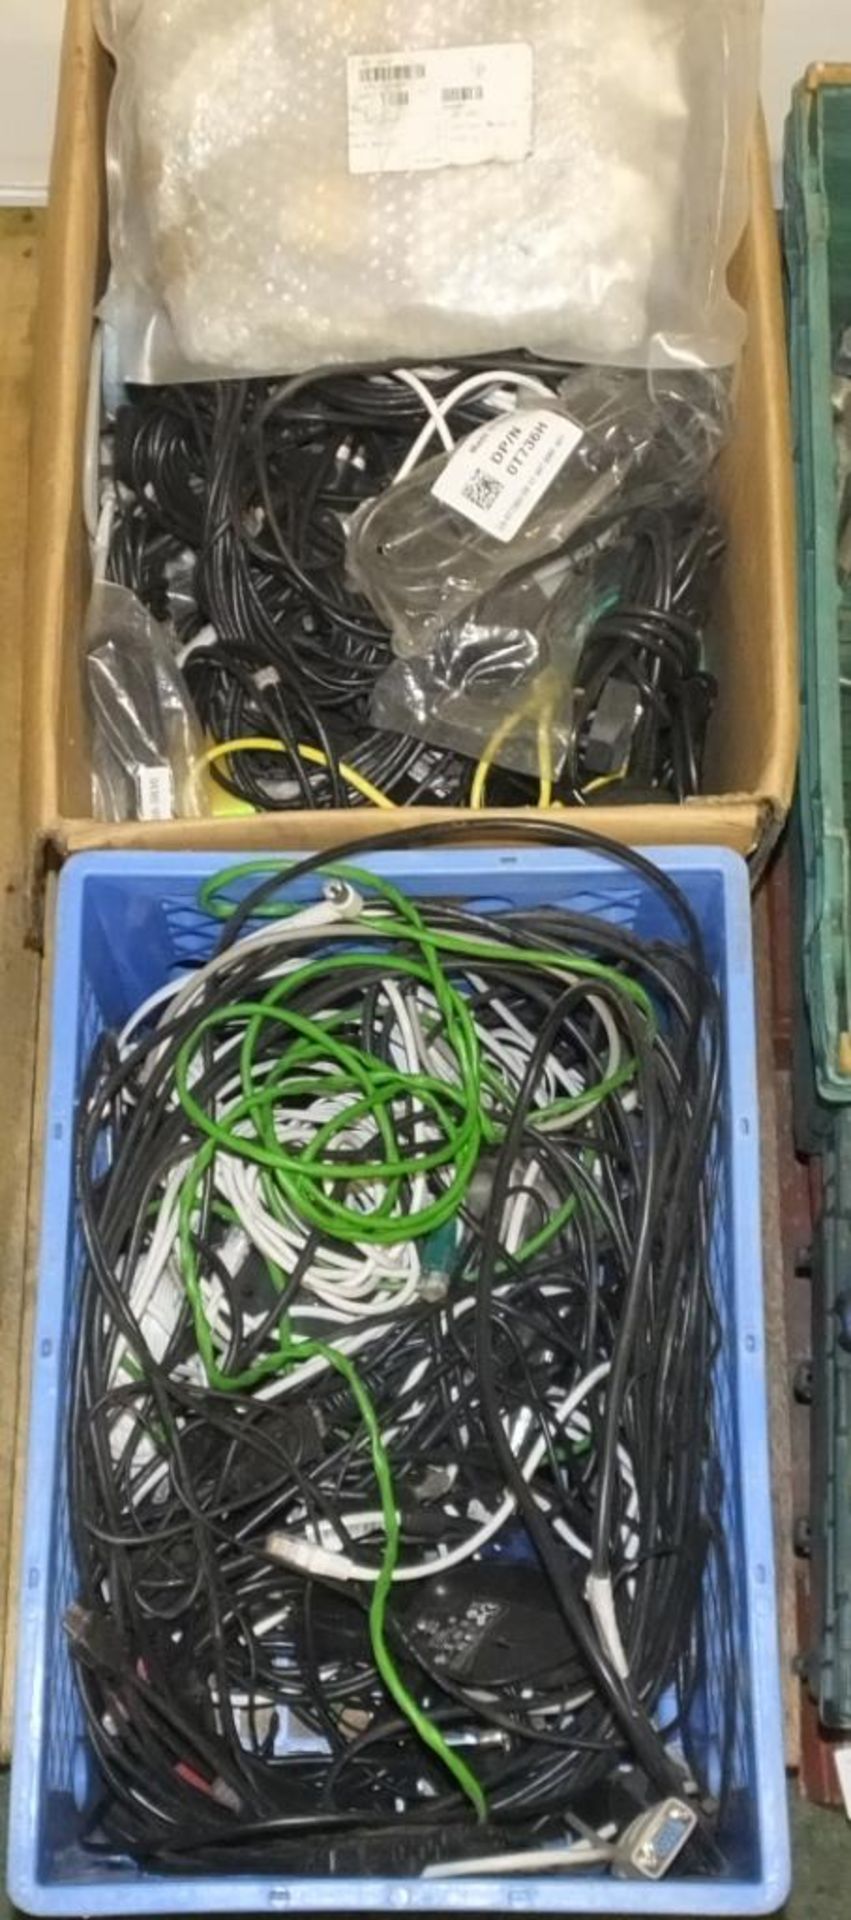 2 boxes of various cables